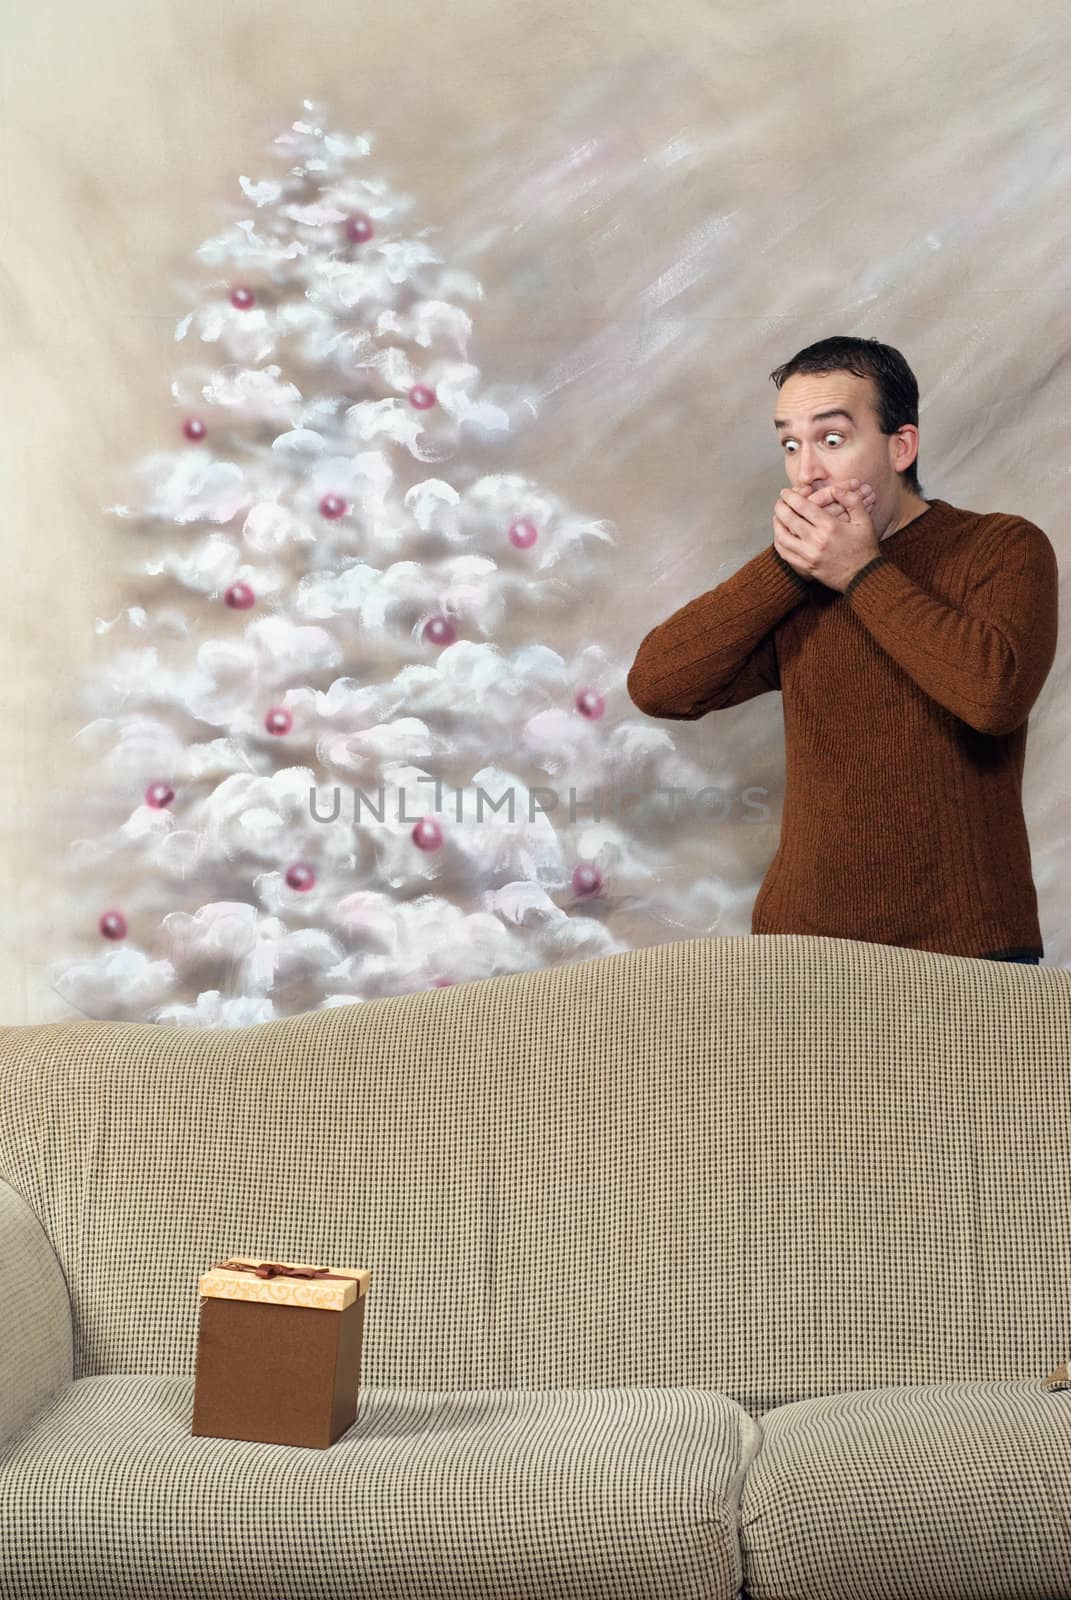 A young man is covering his mouth is shock and surprise that there is a gift on the sofa for him